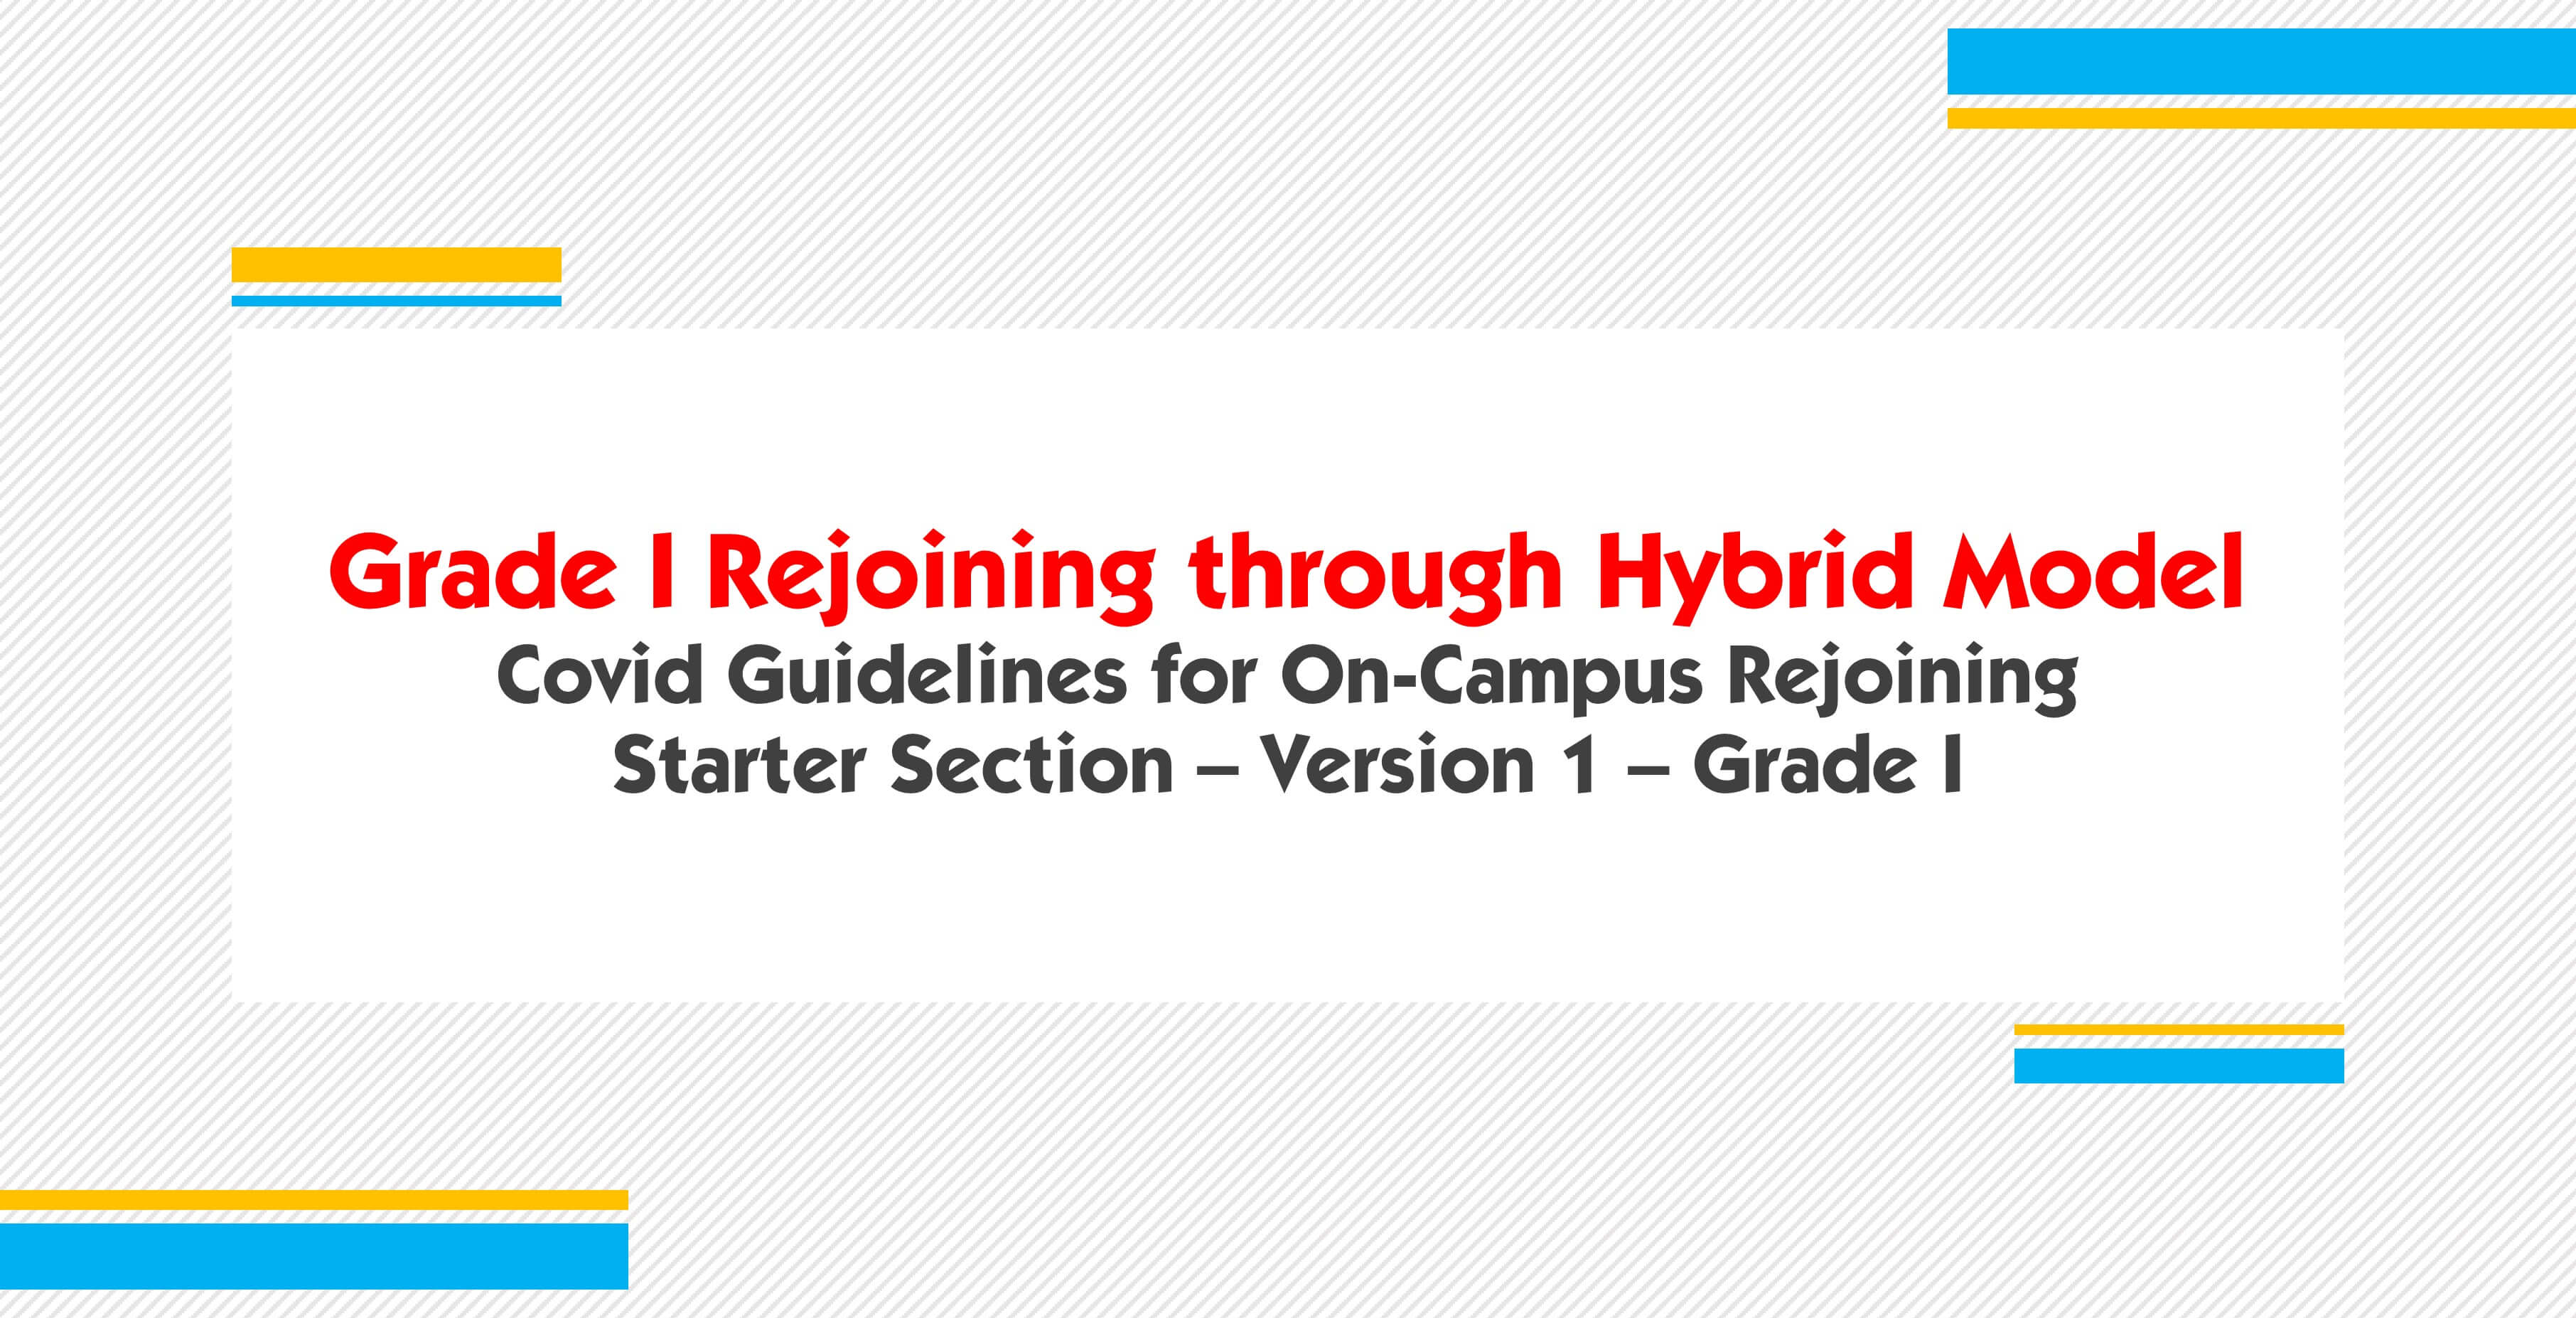 Covid Guidelines for On-Campus Rejoining - Grade I - Version 1